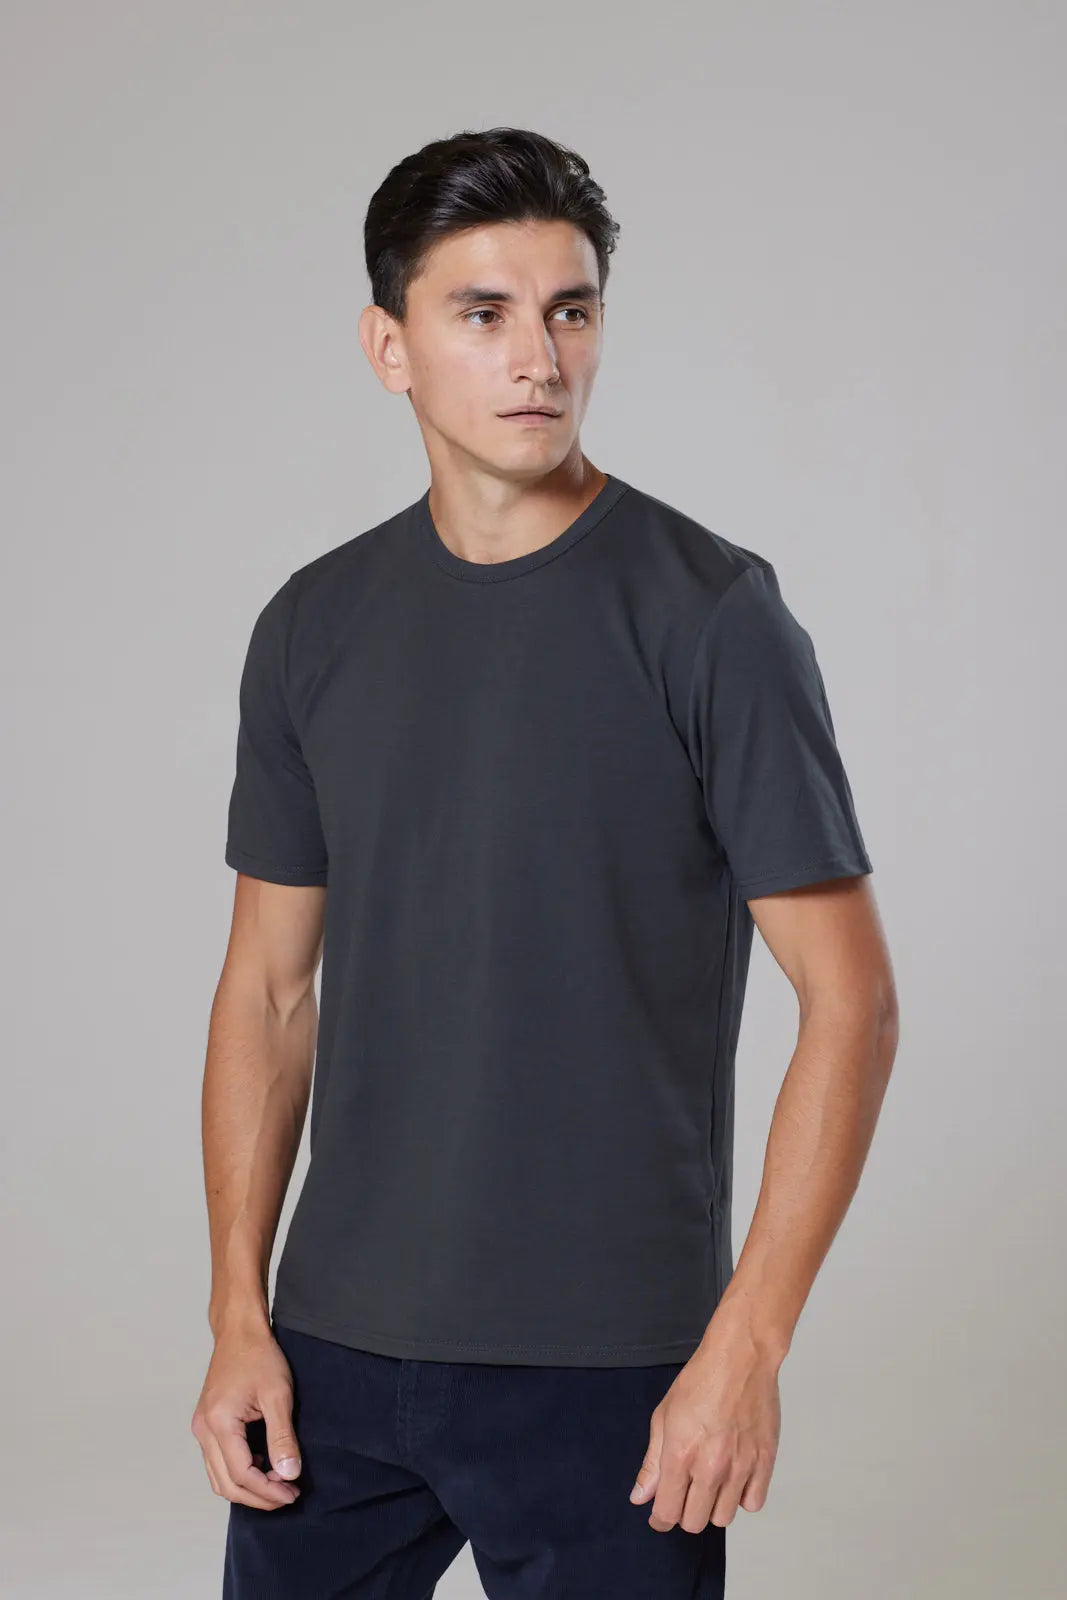 Quality Trueman Cotton Short Sleeve T-Shirts for the Best Comfort